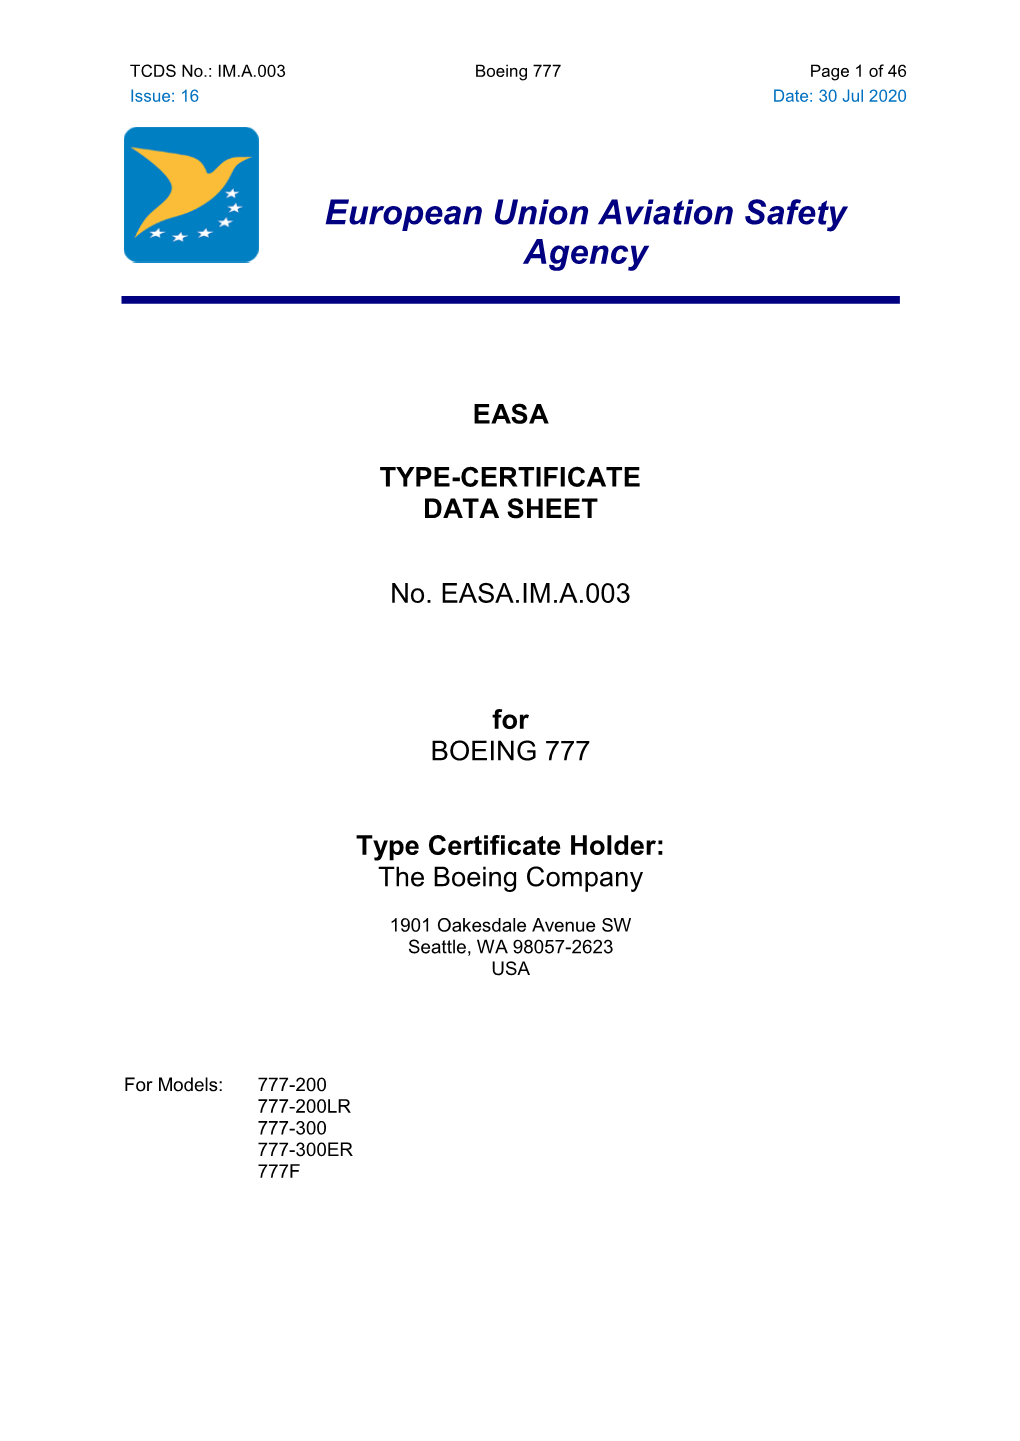 EASA TCDS for Boeing